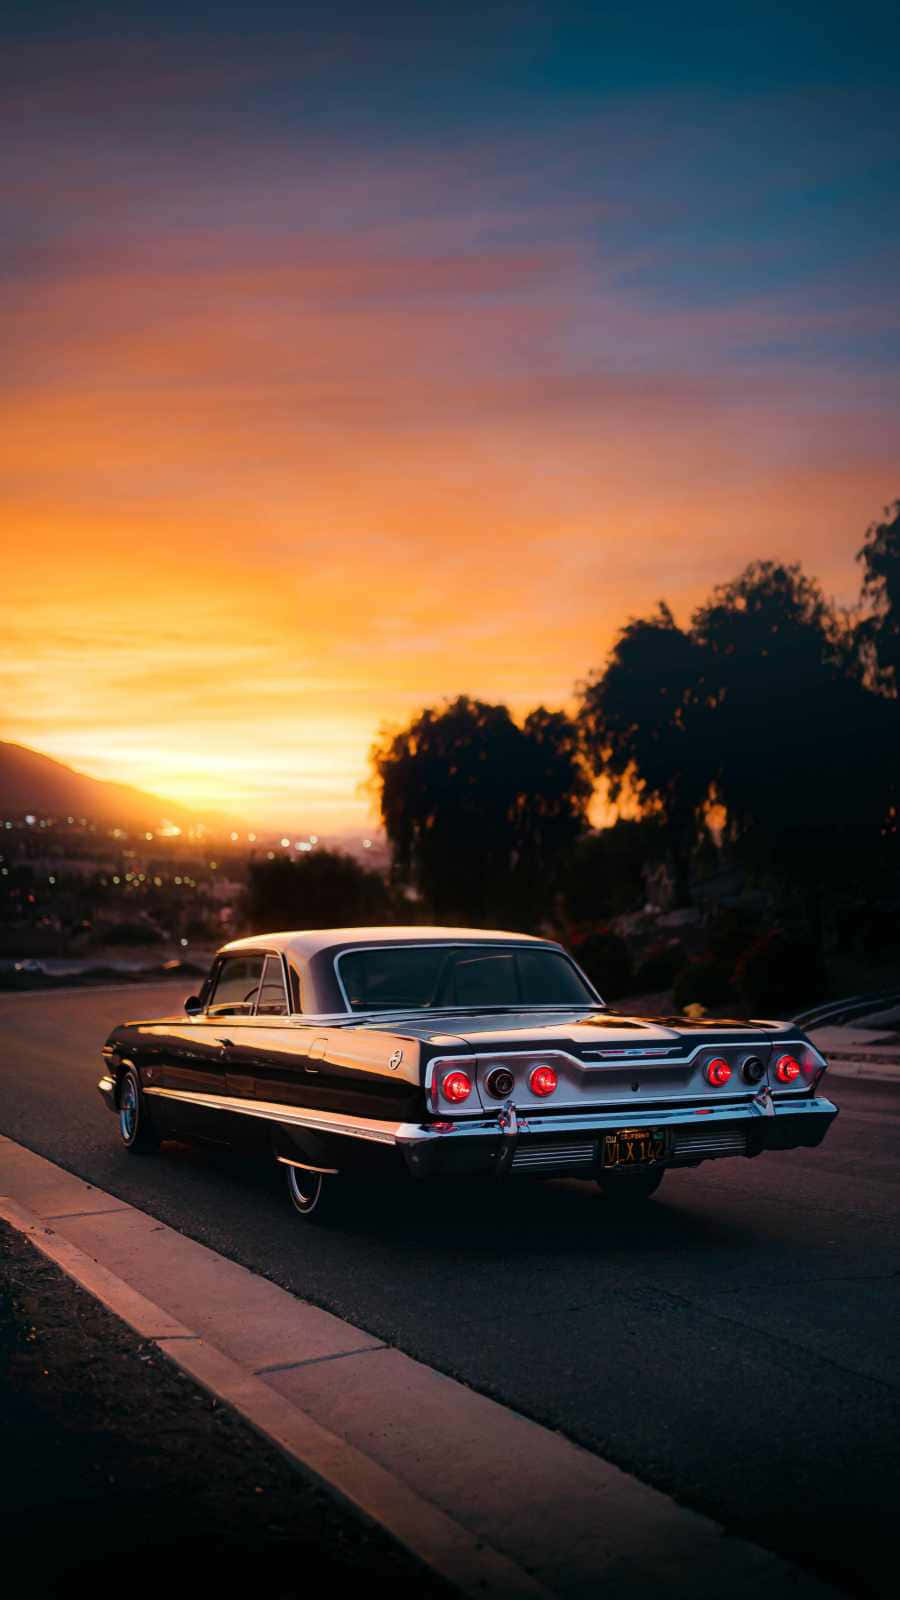 Get a vintage look for your iphone with this classic car wallpaper! Wallpaper